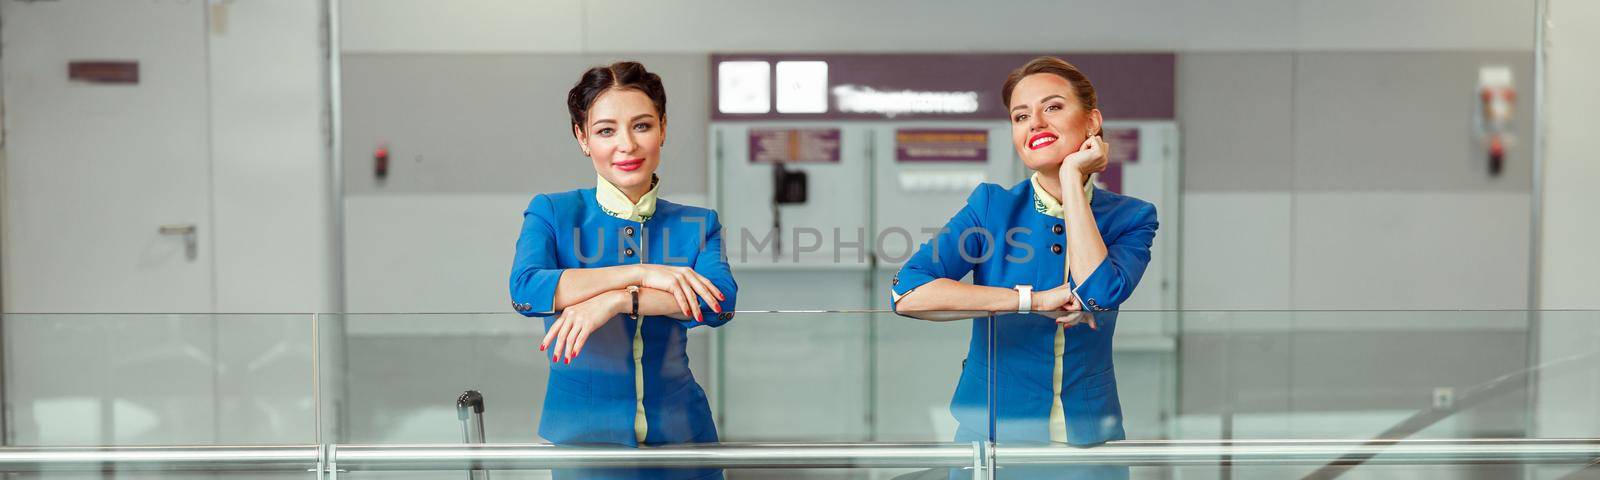 Cheerful female flight attendants in air hostess uniform looking at camera and smiling while standing near trolley luggage bags